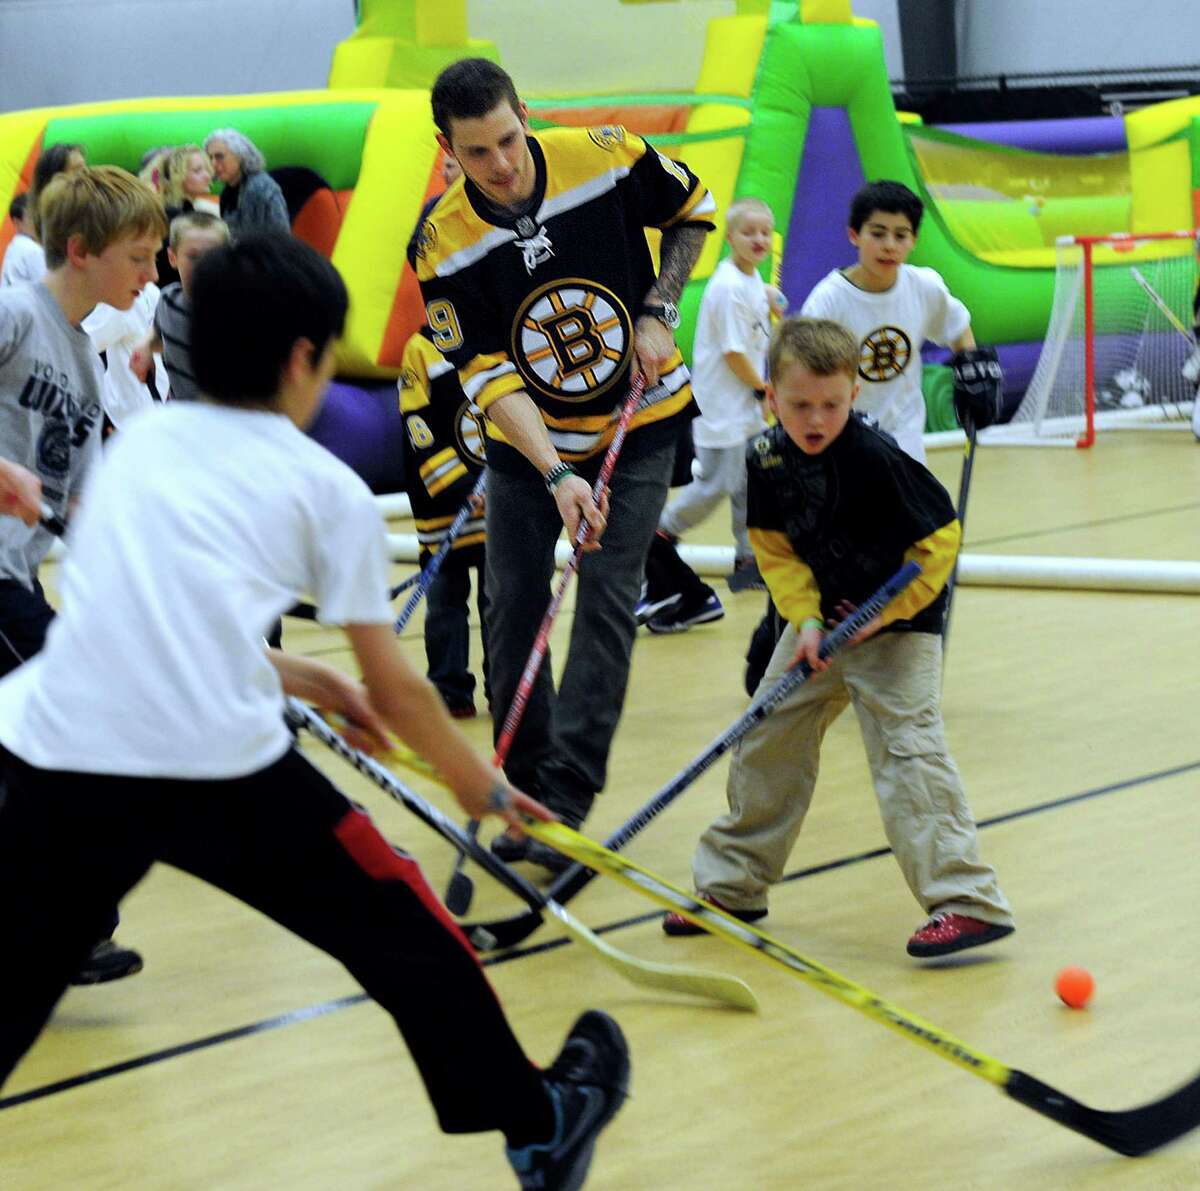 Boston Bruin player, Tyler Seguin, participates in a hockey clinic for Newtown kids at the Newtown Youth Academy, Monday, Feb. 18, 2013.